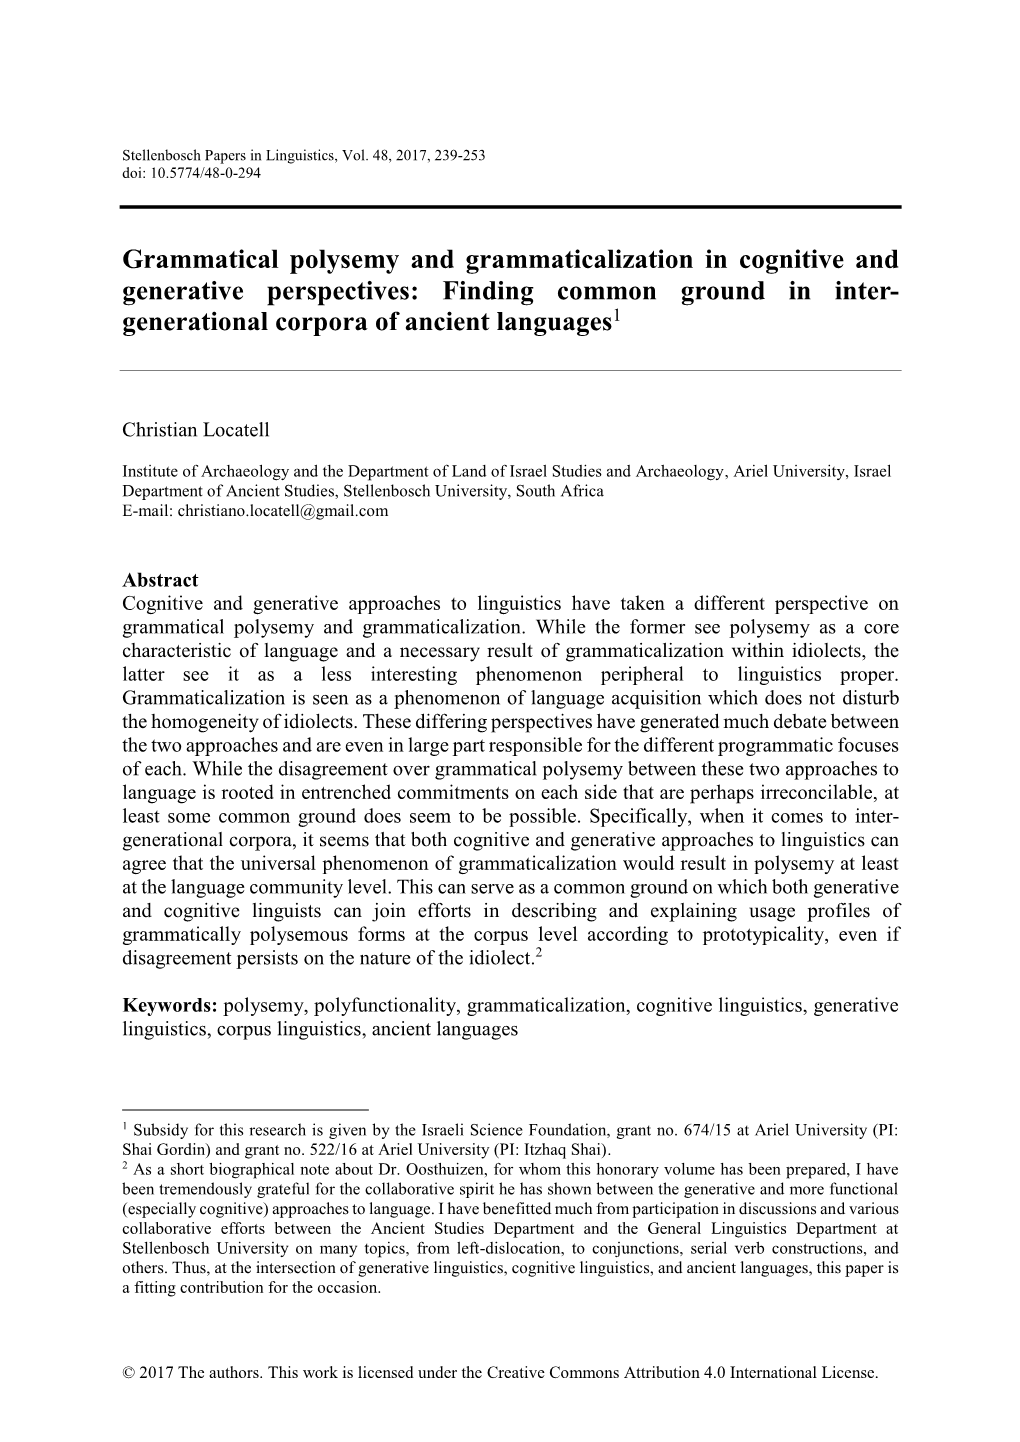 Grammatical Polysemy and Grammaticalization in Cognitive and Generative Perspectives: Finding Common Ground in Inter- Generational Corpora of Ancient Languages1